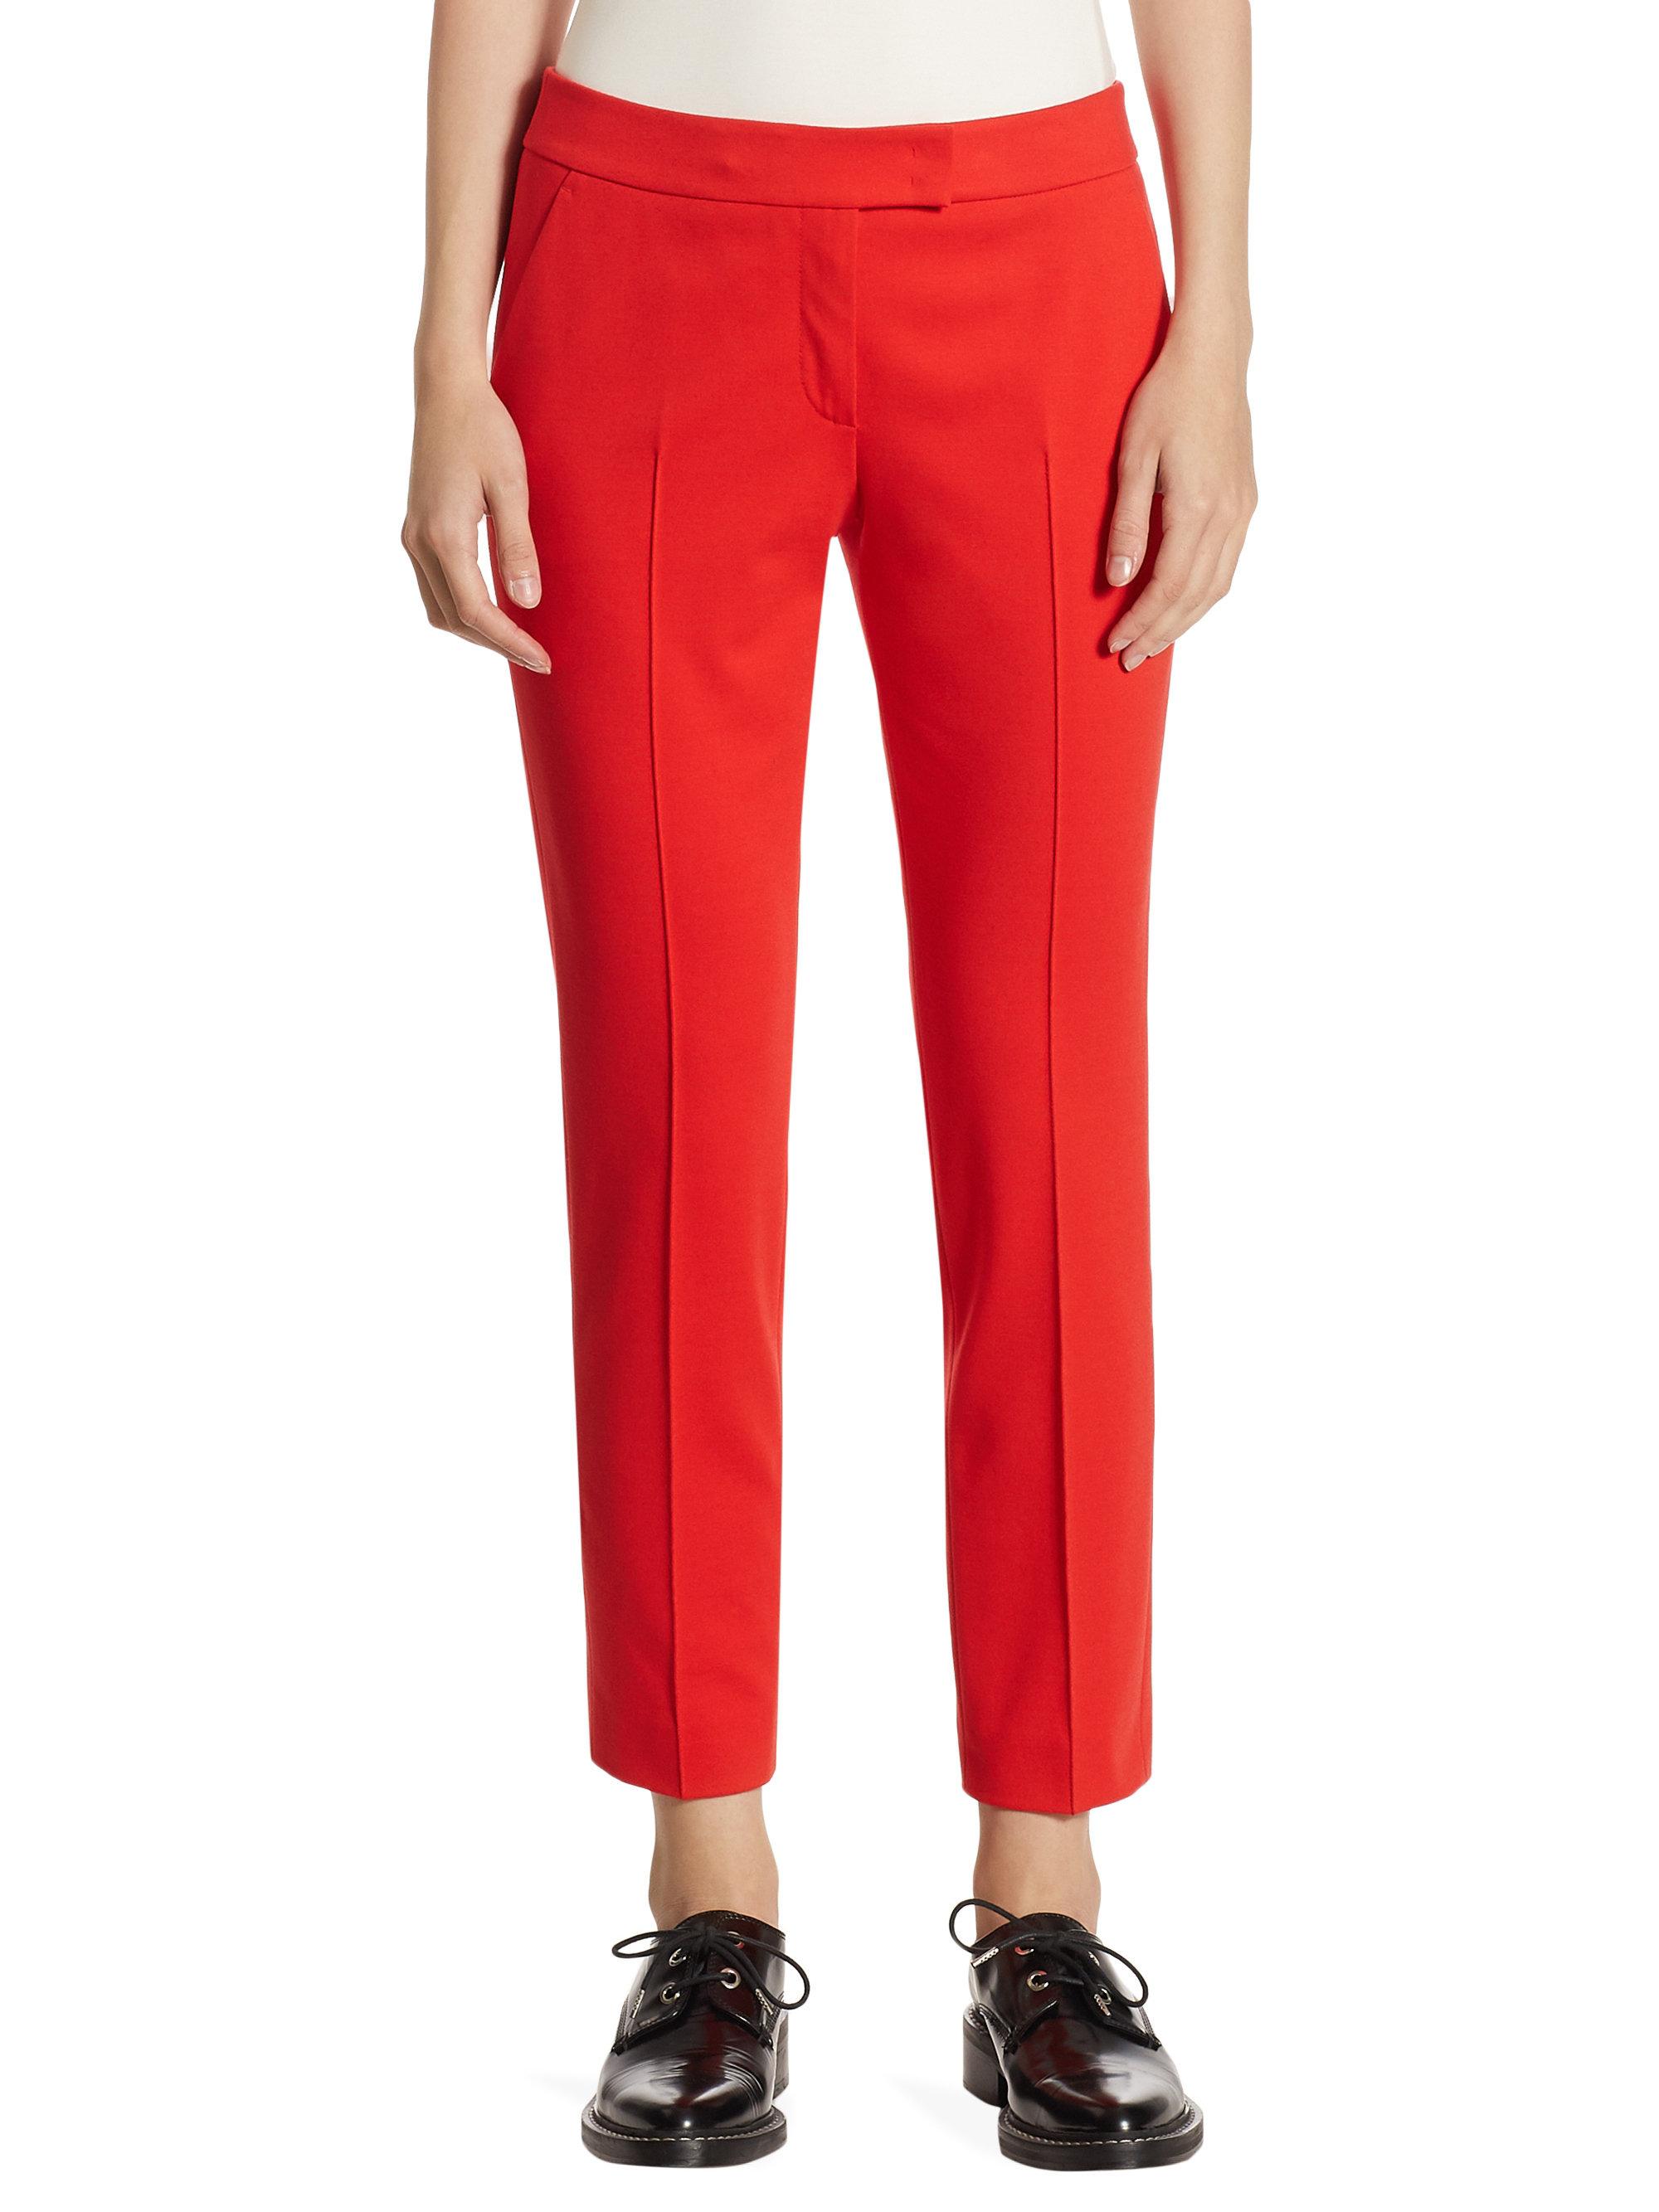 Lyst - Akris Punto Piped Jersey Pants in Red